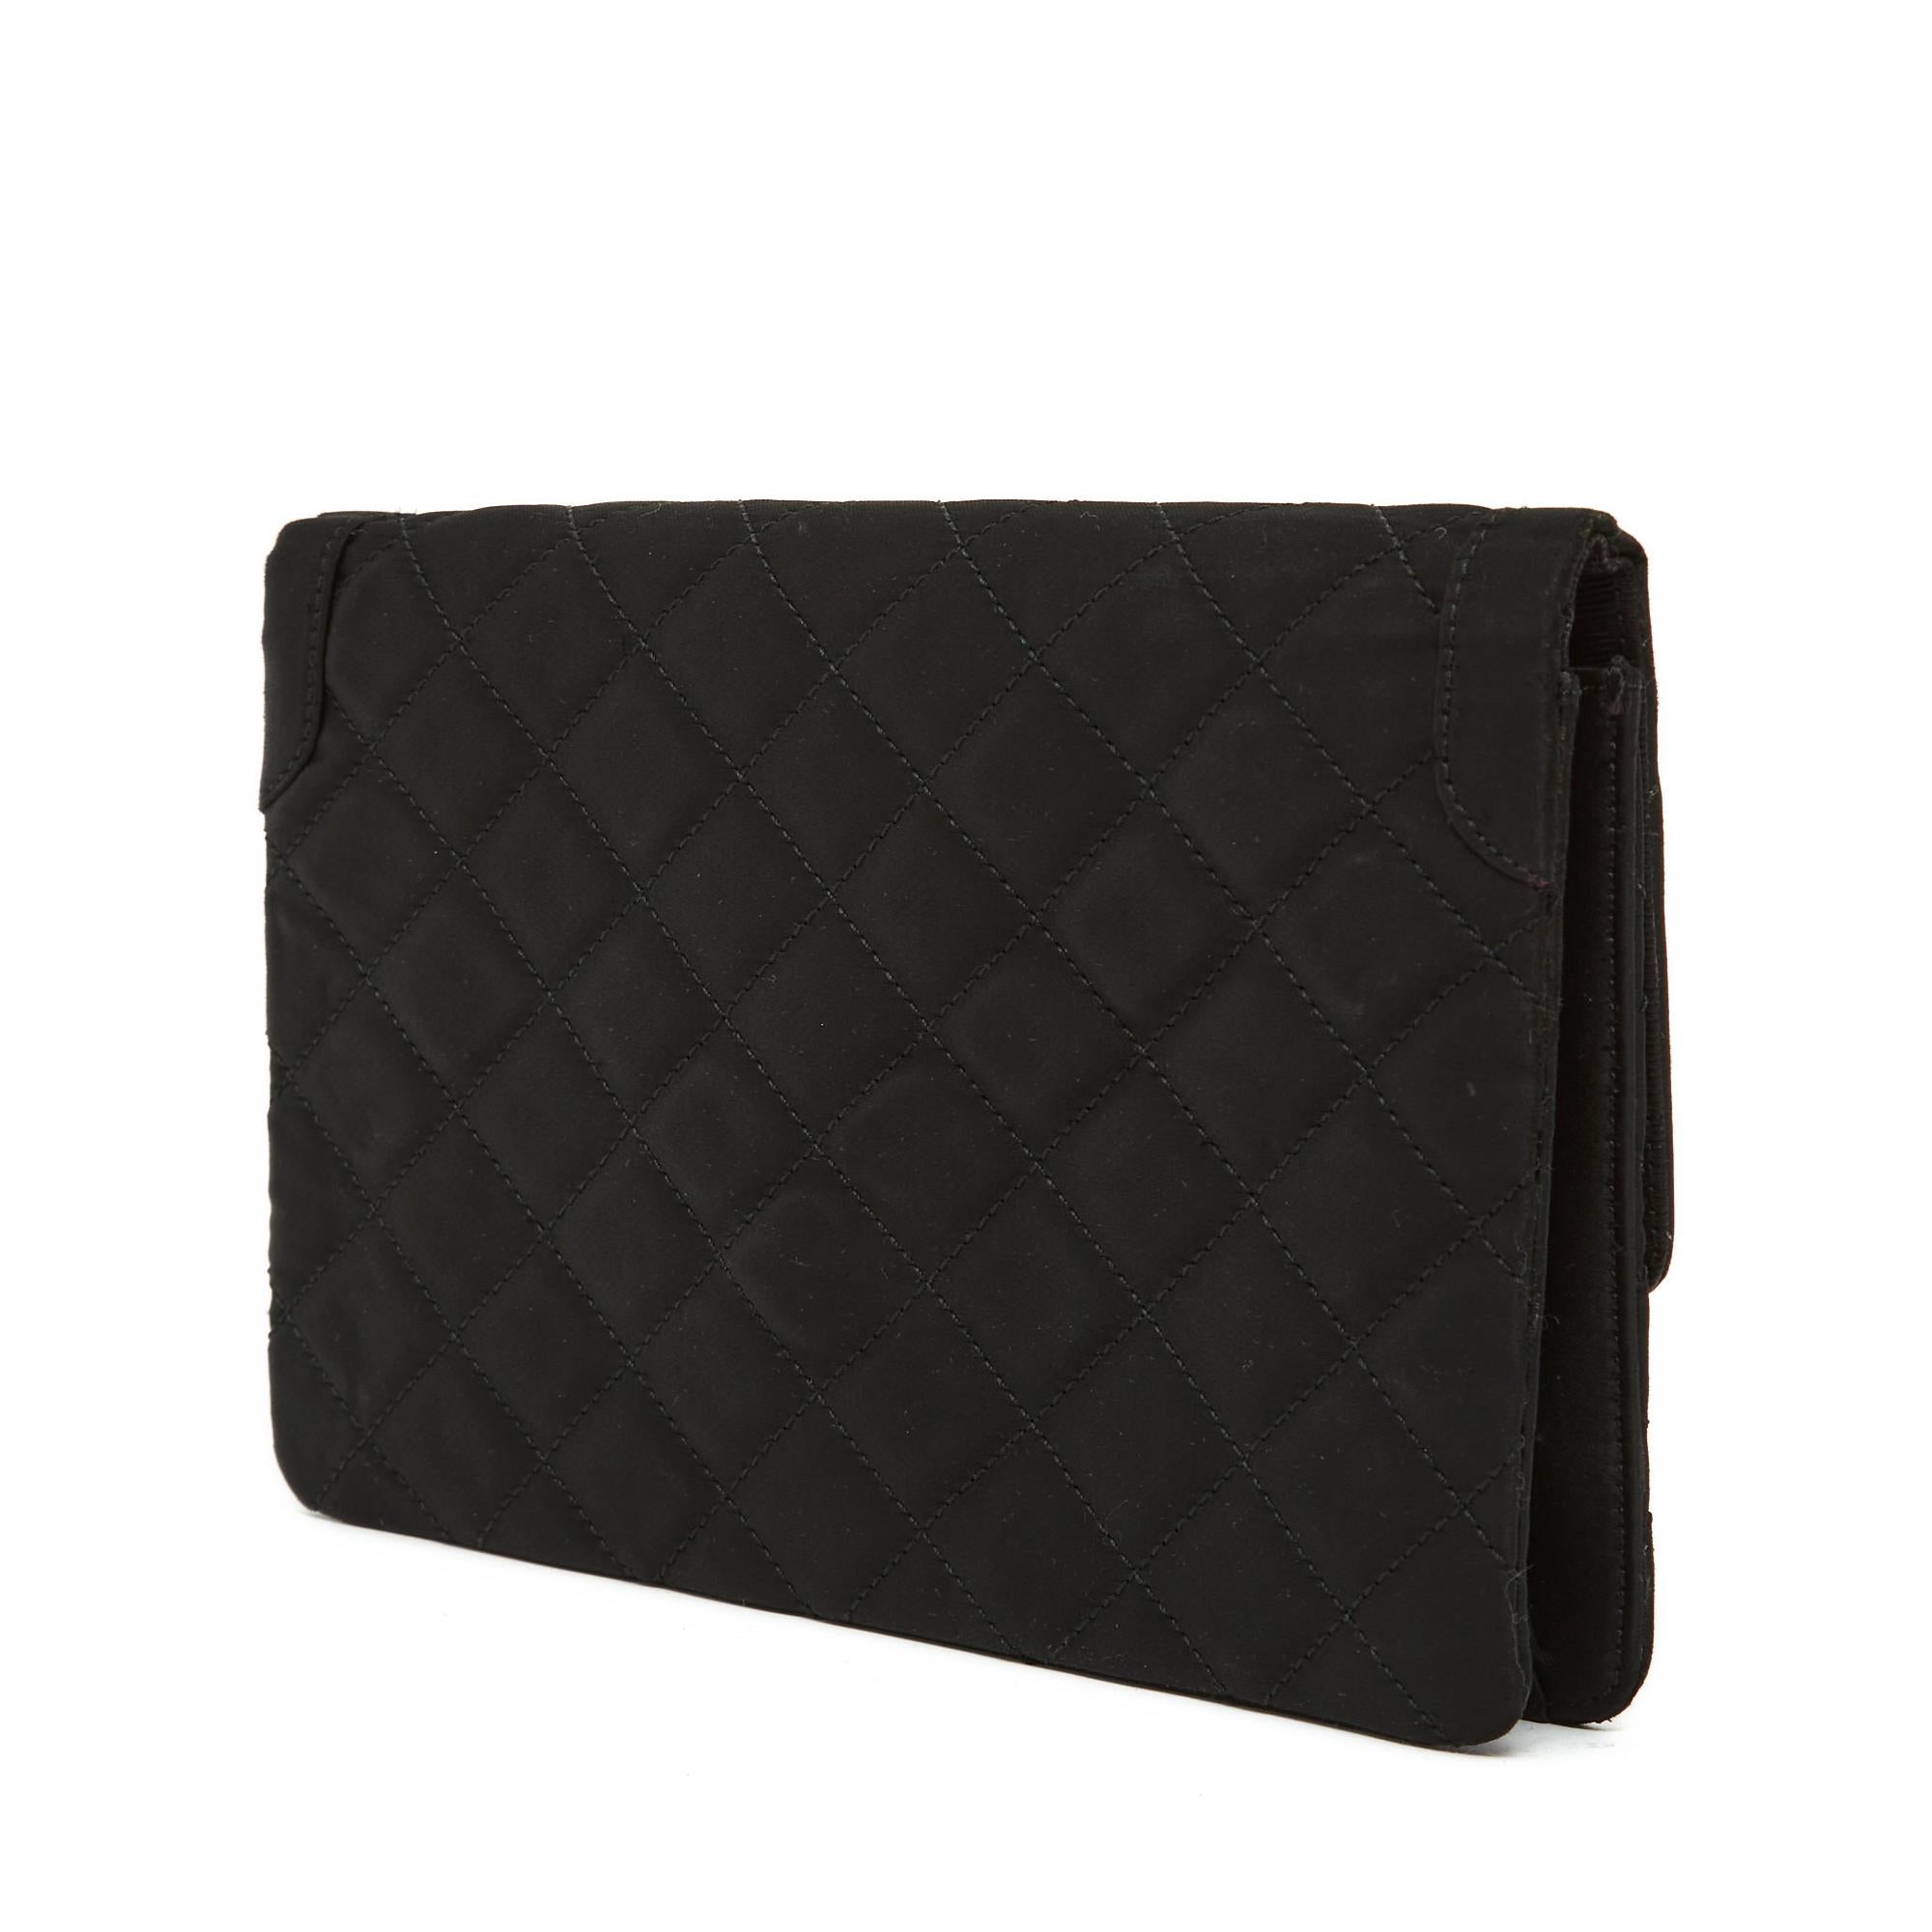 Chanel Bag 1996 Haute Couture Quilted silk satin black  For Sale 2